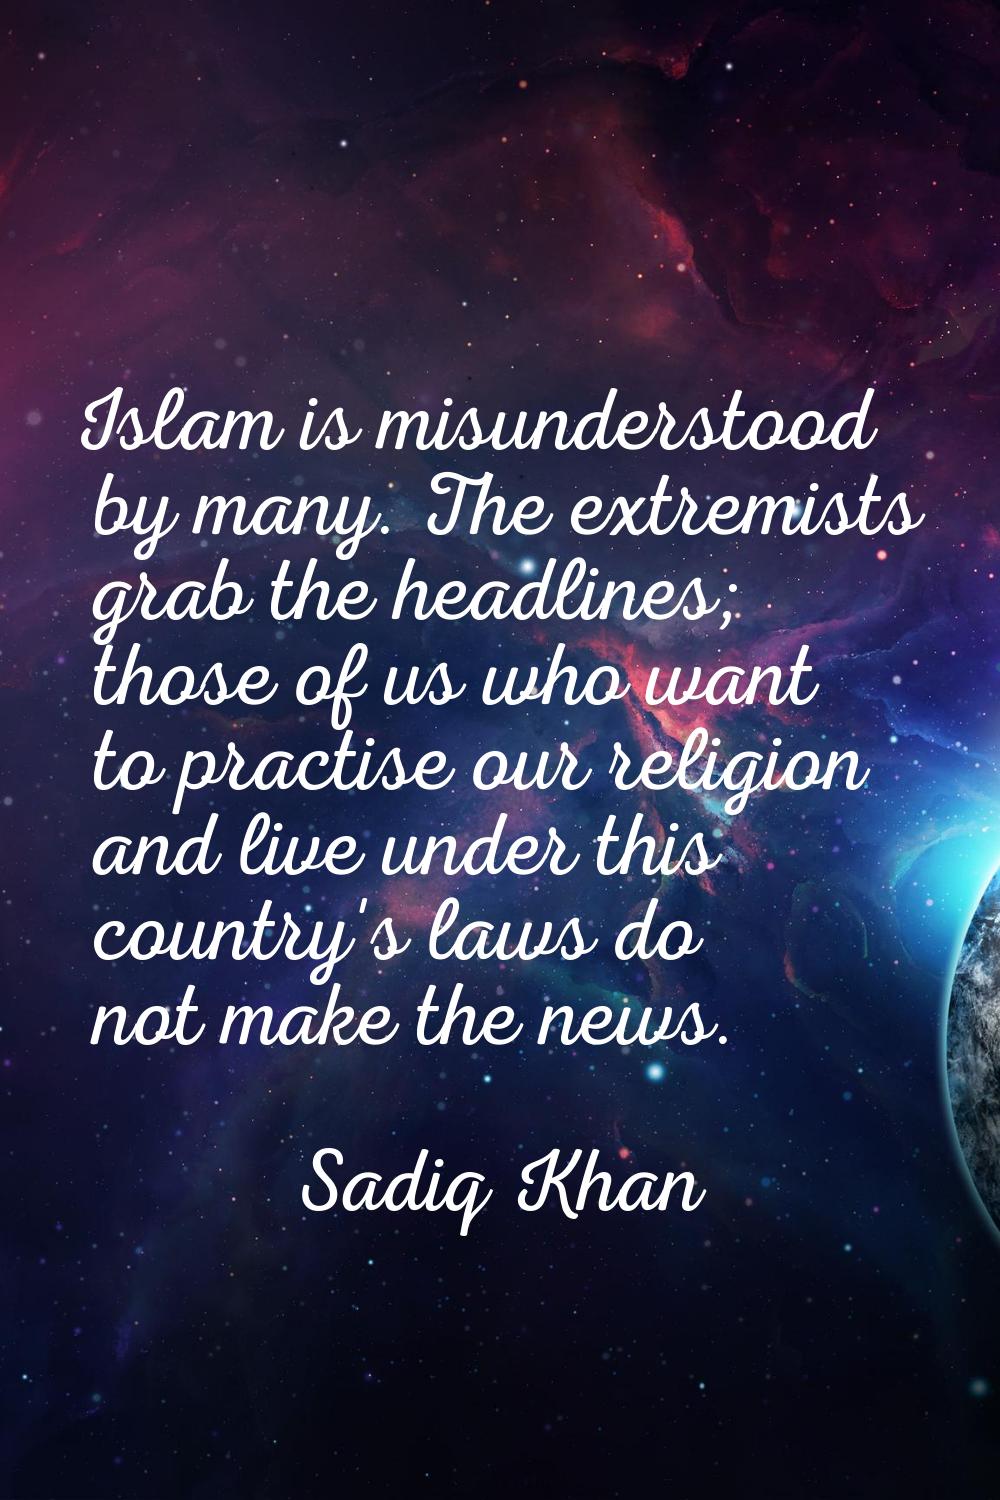 Islam is misunderstood by many. The extremists grab the headlines; those of us who want to practise